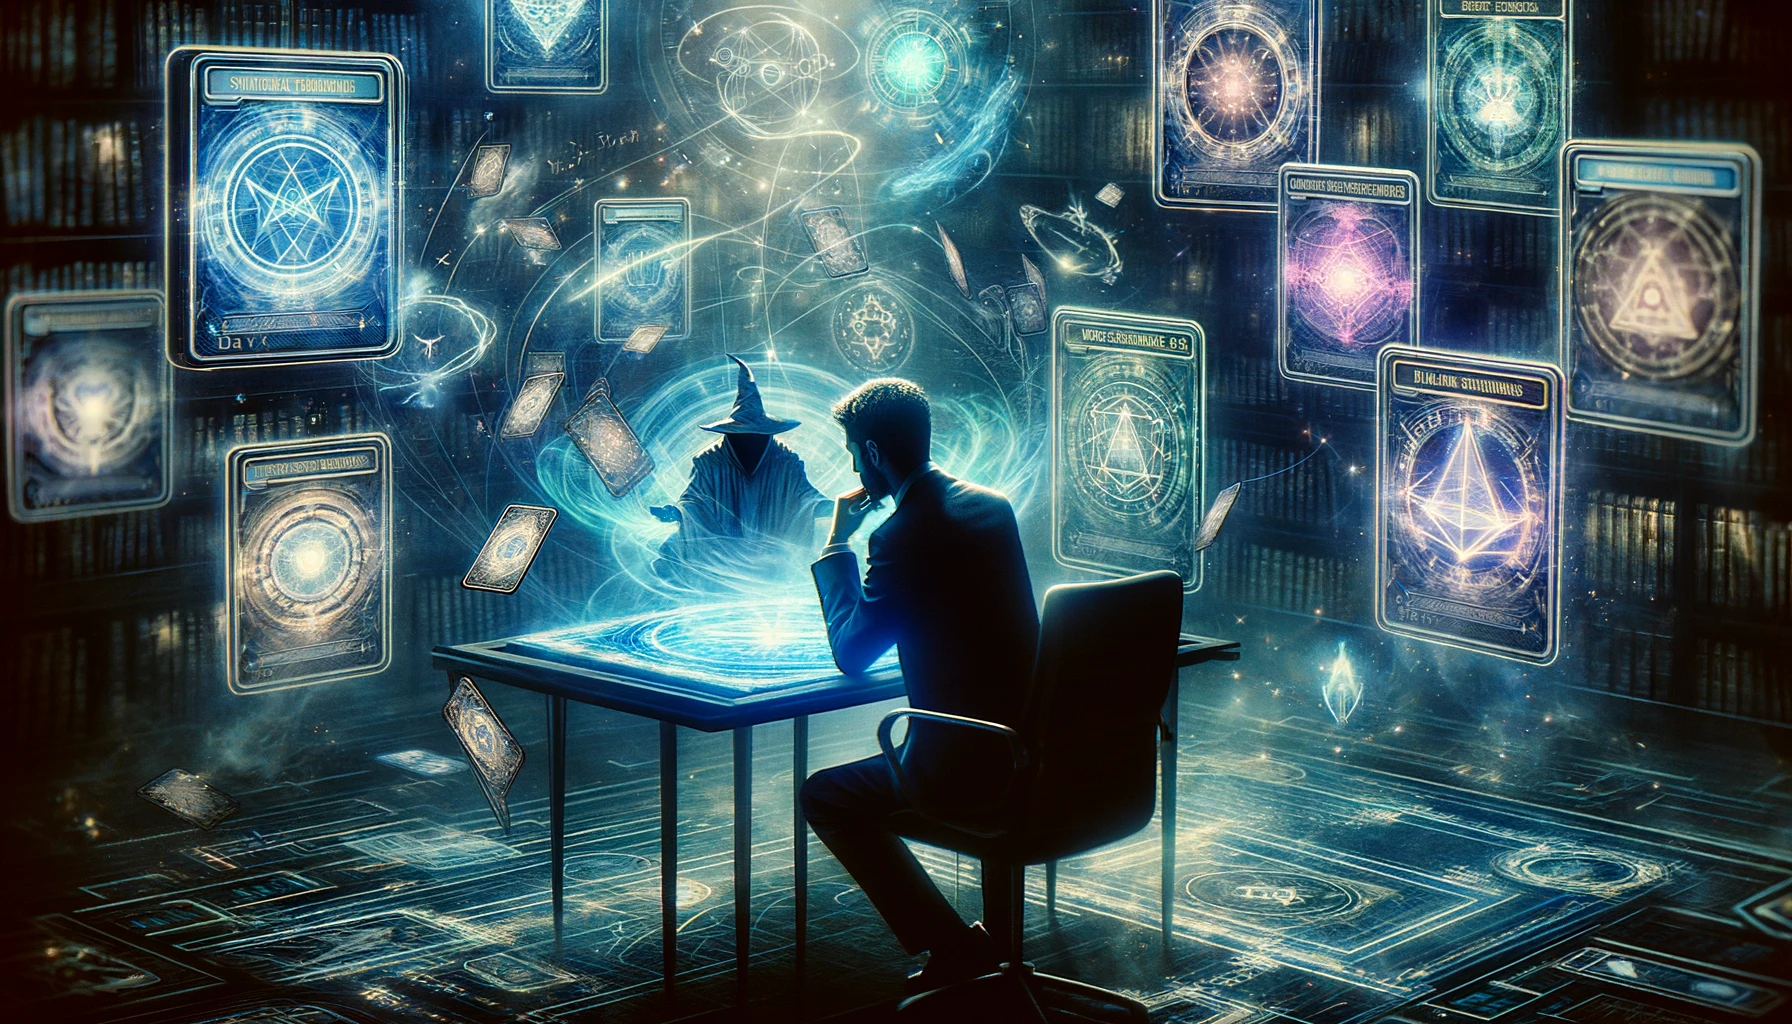 A mystical digital depiction of a strategist playing Marvel Snap, surrounded by holographic cards and arcane symbols, blending ancient magic with futuristic gaming.